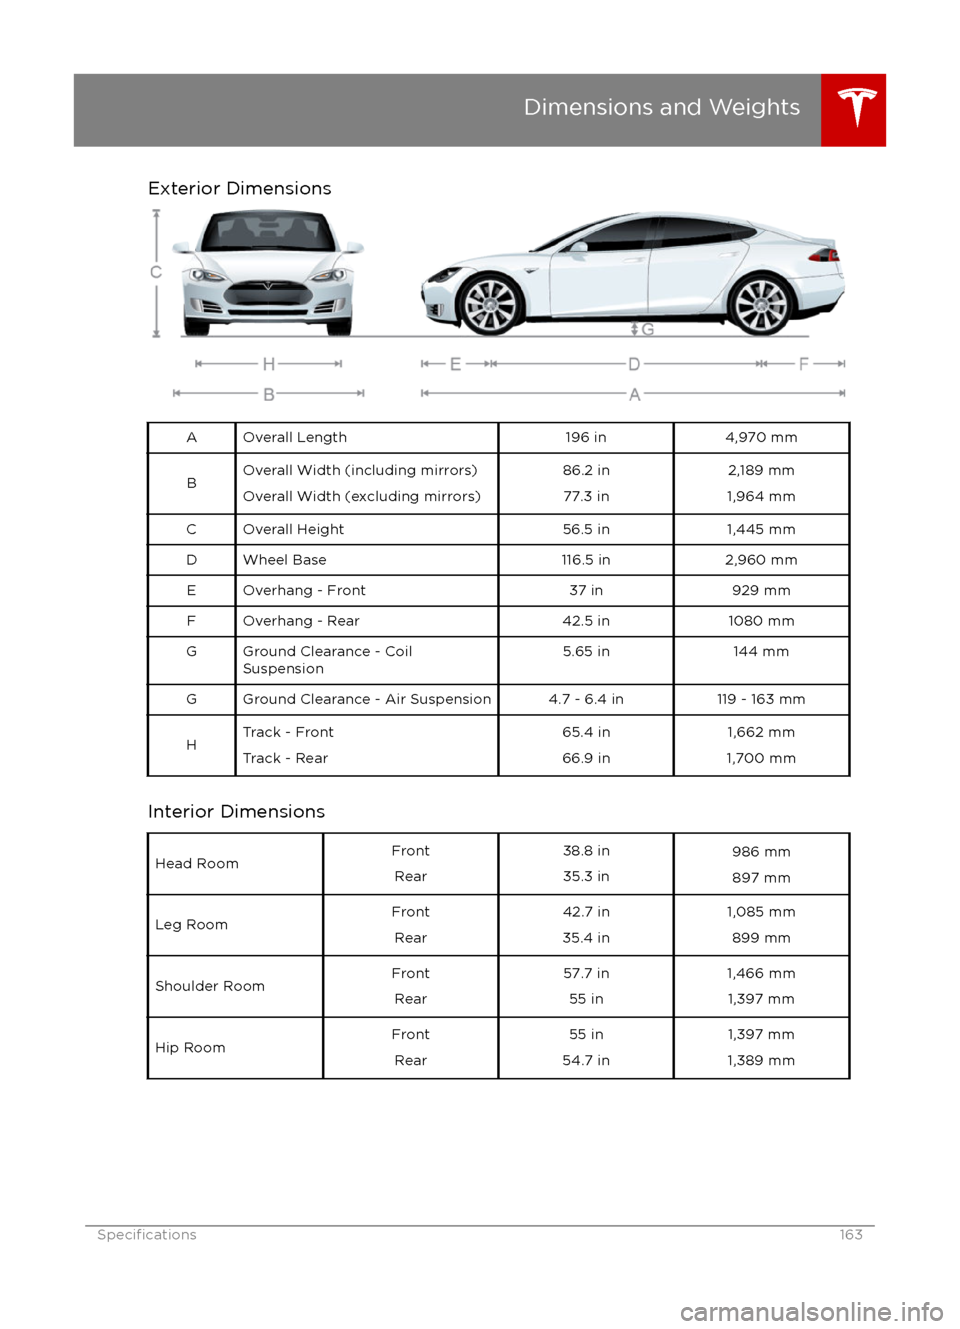 TESLA MODEL S 2016  Owners Manual Exterior DimensionsAOverall Length196 in4,970 mmBOverall Width (including mirrors)Overall Width (excluding mirrors)86.2 in 77.3 in2,189 mm
1,964 mmCOverall Height56.5 in1,445 mmDWheel Base116.5 in2,96